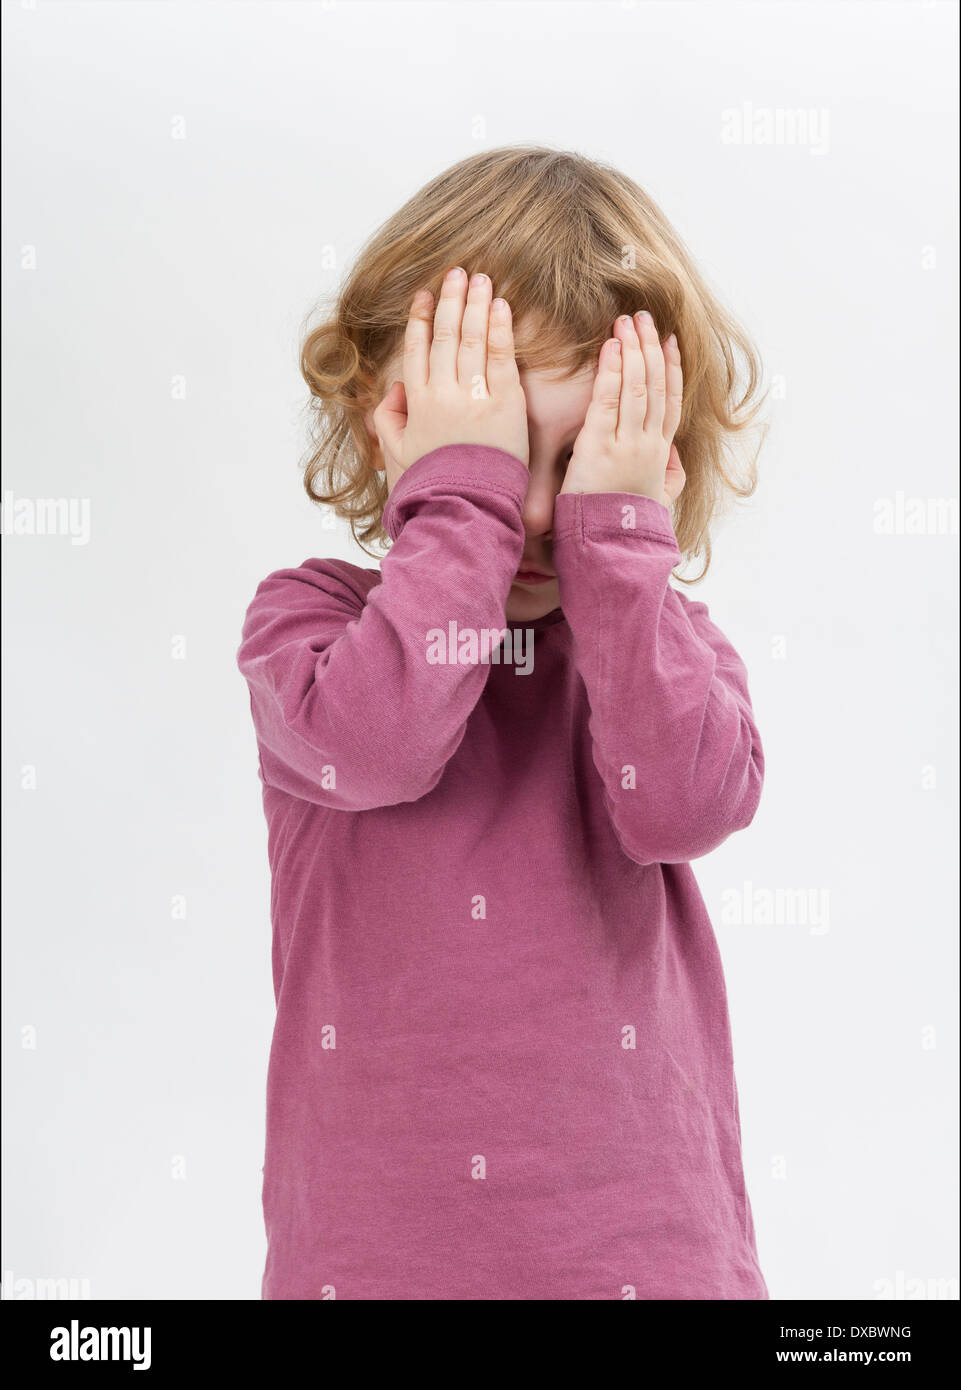 child covering eyes with hands. studio shot in grey background Stock Photo